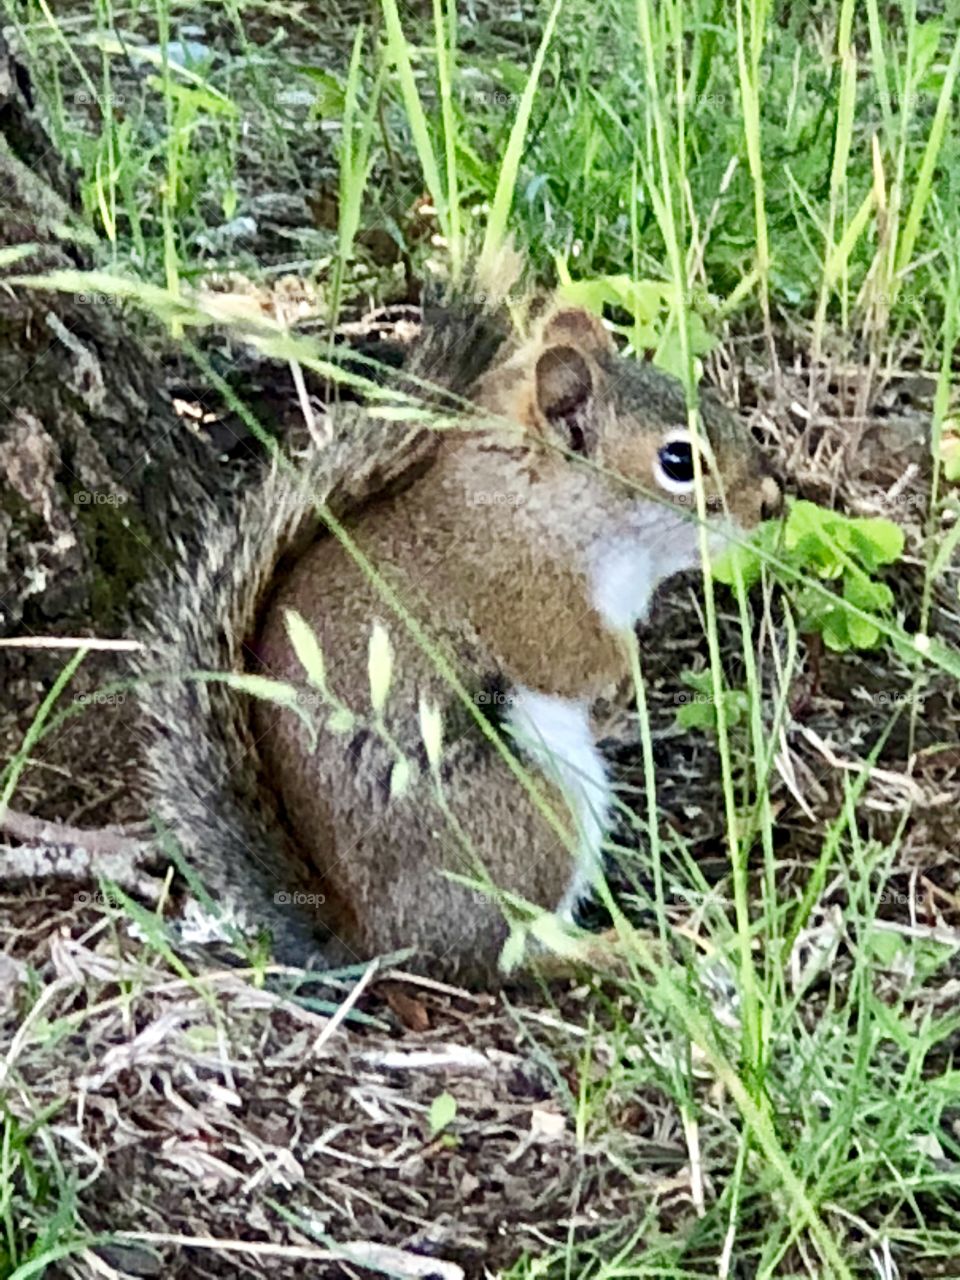 Squirrels are all over the place this year. They love to eat your bird food. But hey they need to eat to. Very cute furry creatures. 